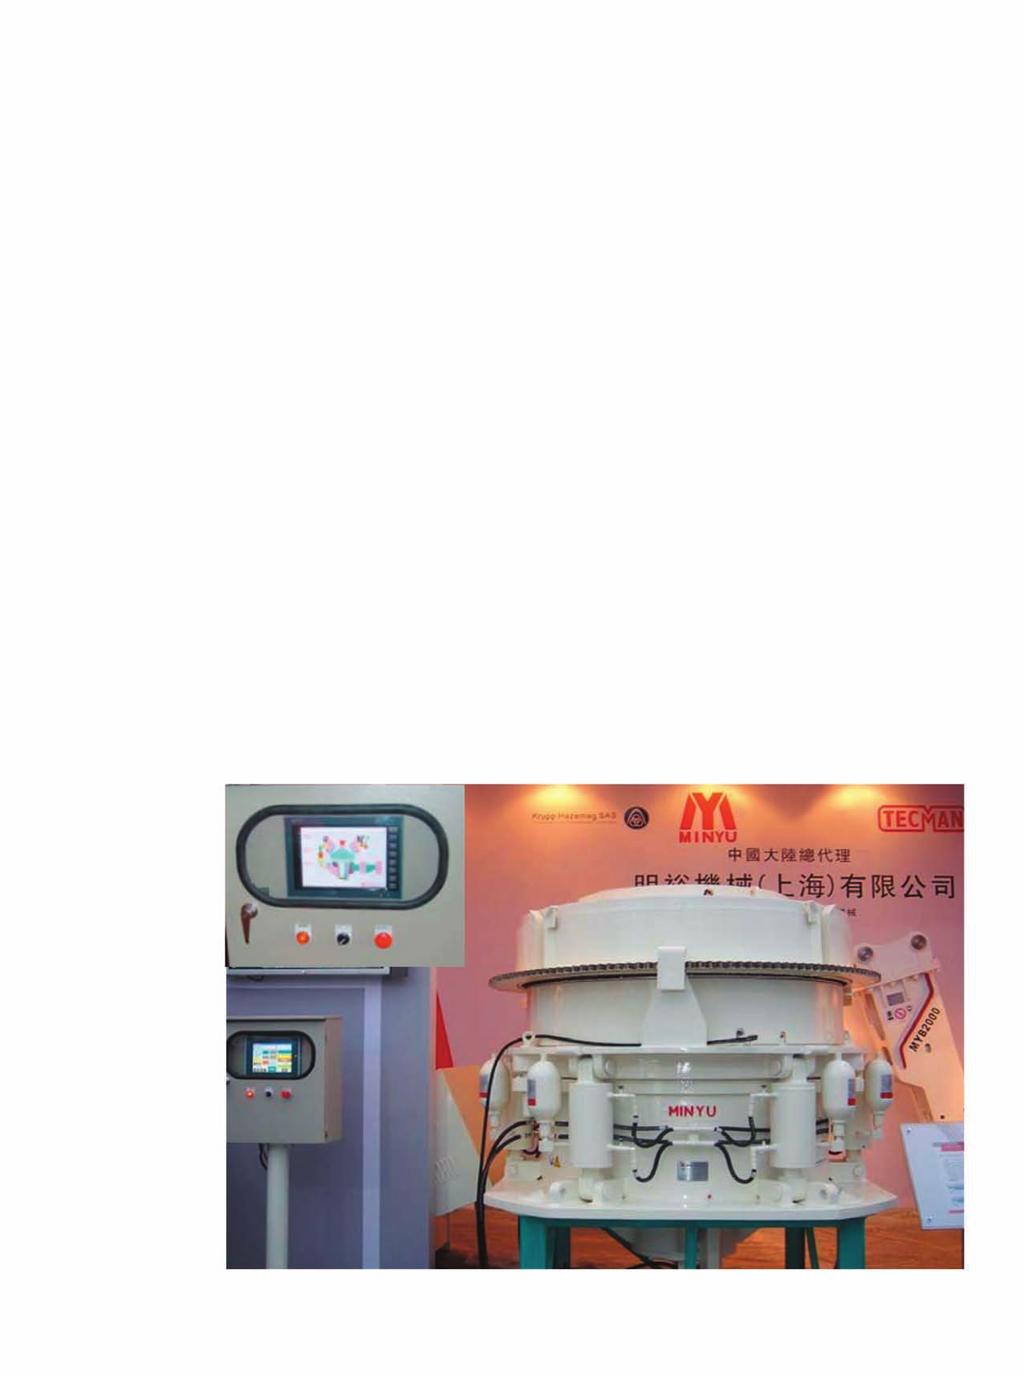 High Performance Cone Crusher EASY-TO-OPERATE CONTROLLER When equipped with the manual button-controlled Electric Panel Controller configuration option, the Minyu SP Series Cone Crusher has the